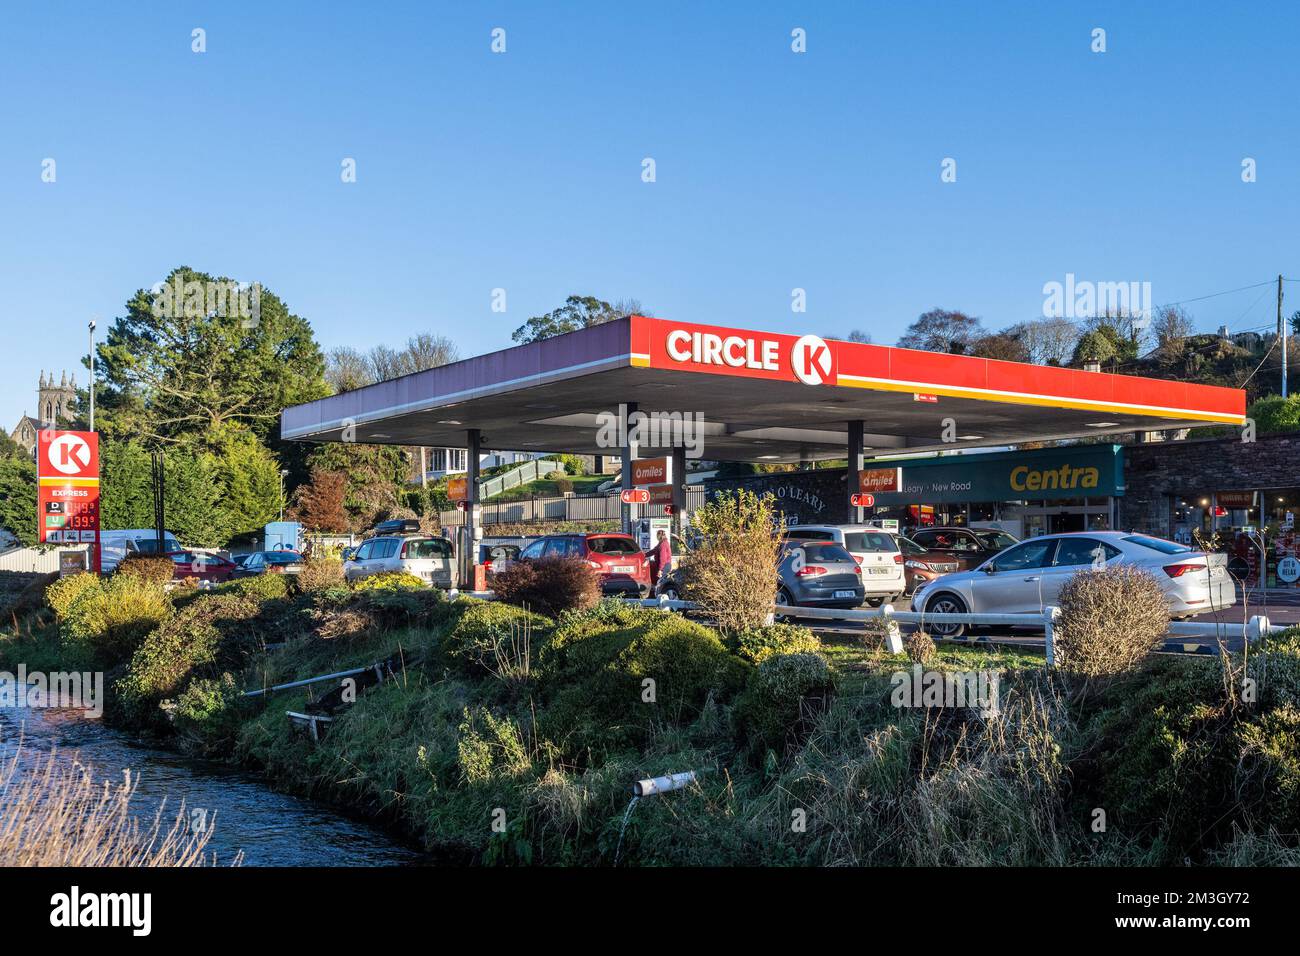 Bandon, West Cork, Ireland. 15th Dec, 2022. Fuel retailer Circle K reduced its fuel by 20c per litre today. The fuel was reduced between 1pm to 4pm across 350 service stations in Ireland as a 'thank you' by the company. There were big queues at Circle K Bandon as motorists tried to fill up before 4pm. Credit: AG News/Alamy Live News Stock Photo